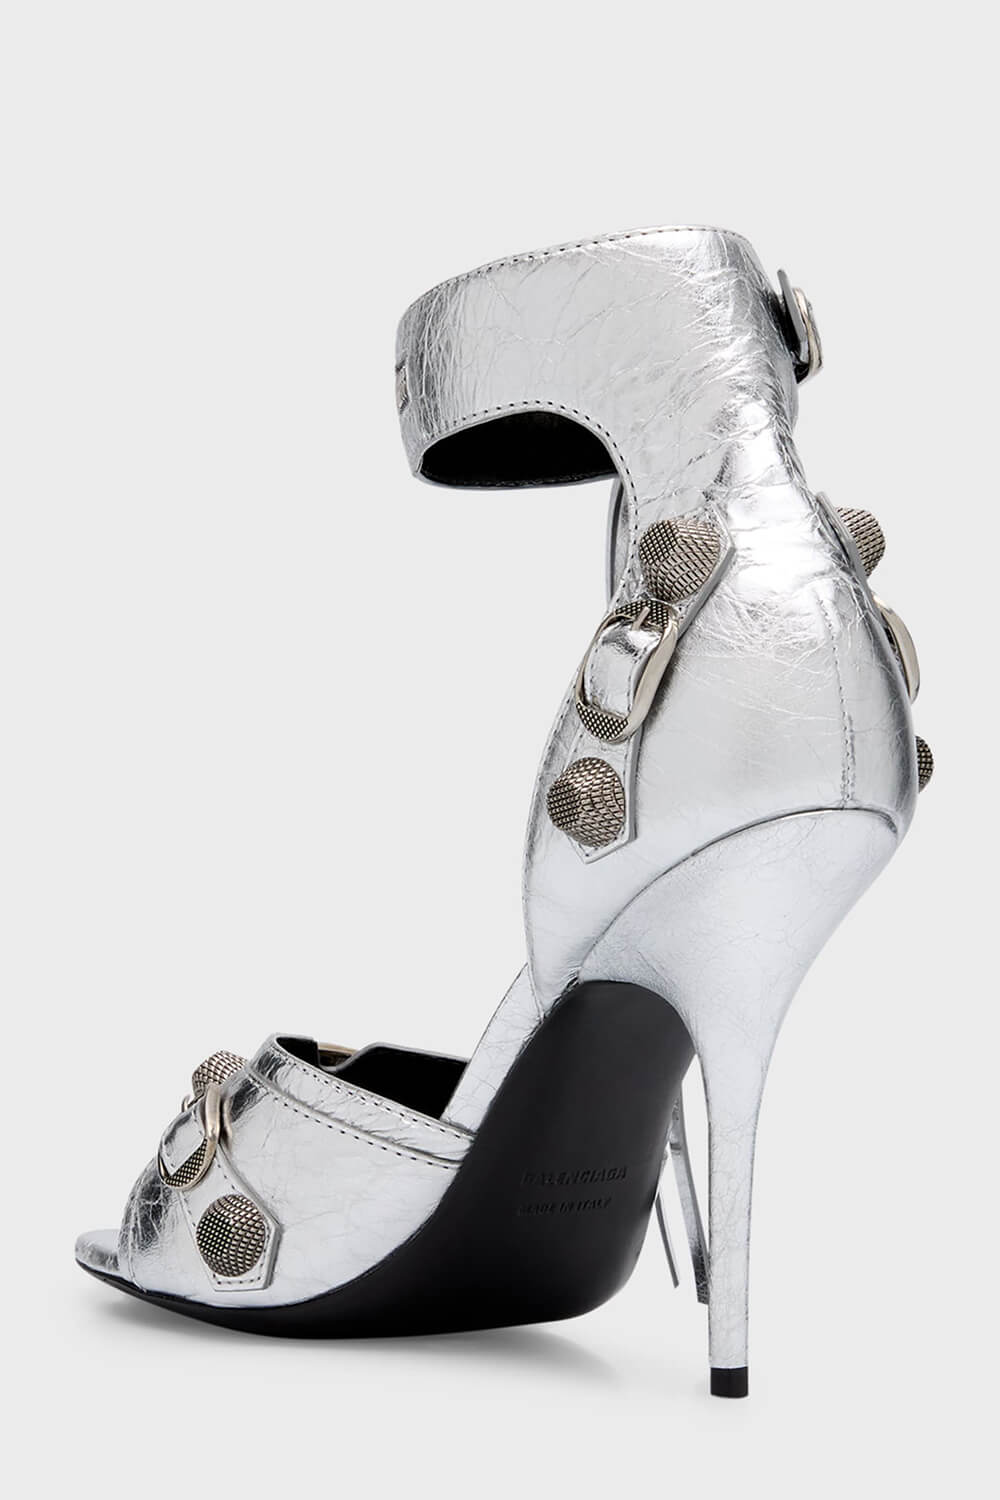 Studs And Buckles Embellished Metallic Crinkled Ankle Heeled Sandals - Silver